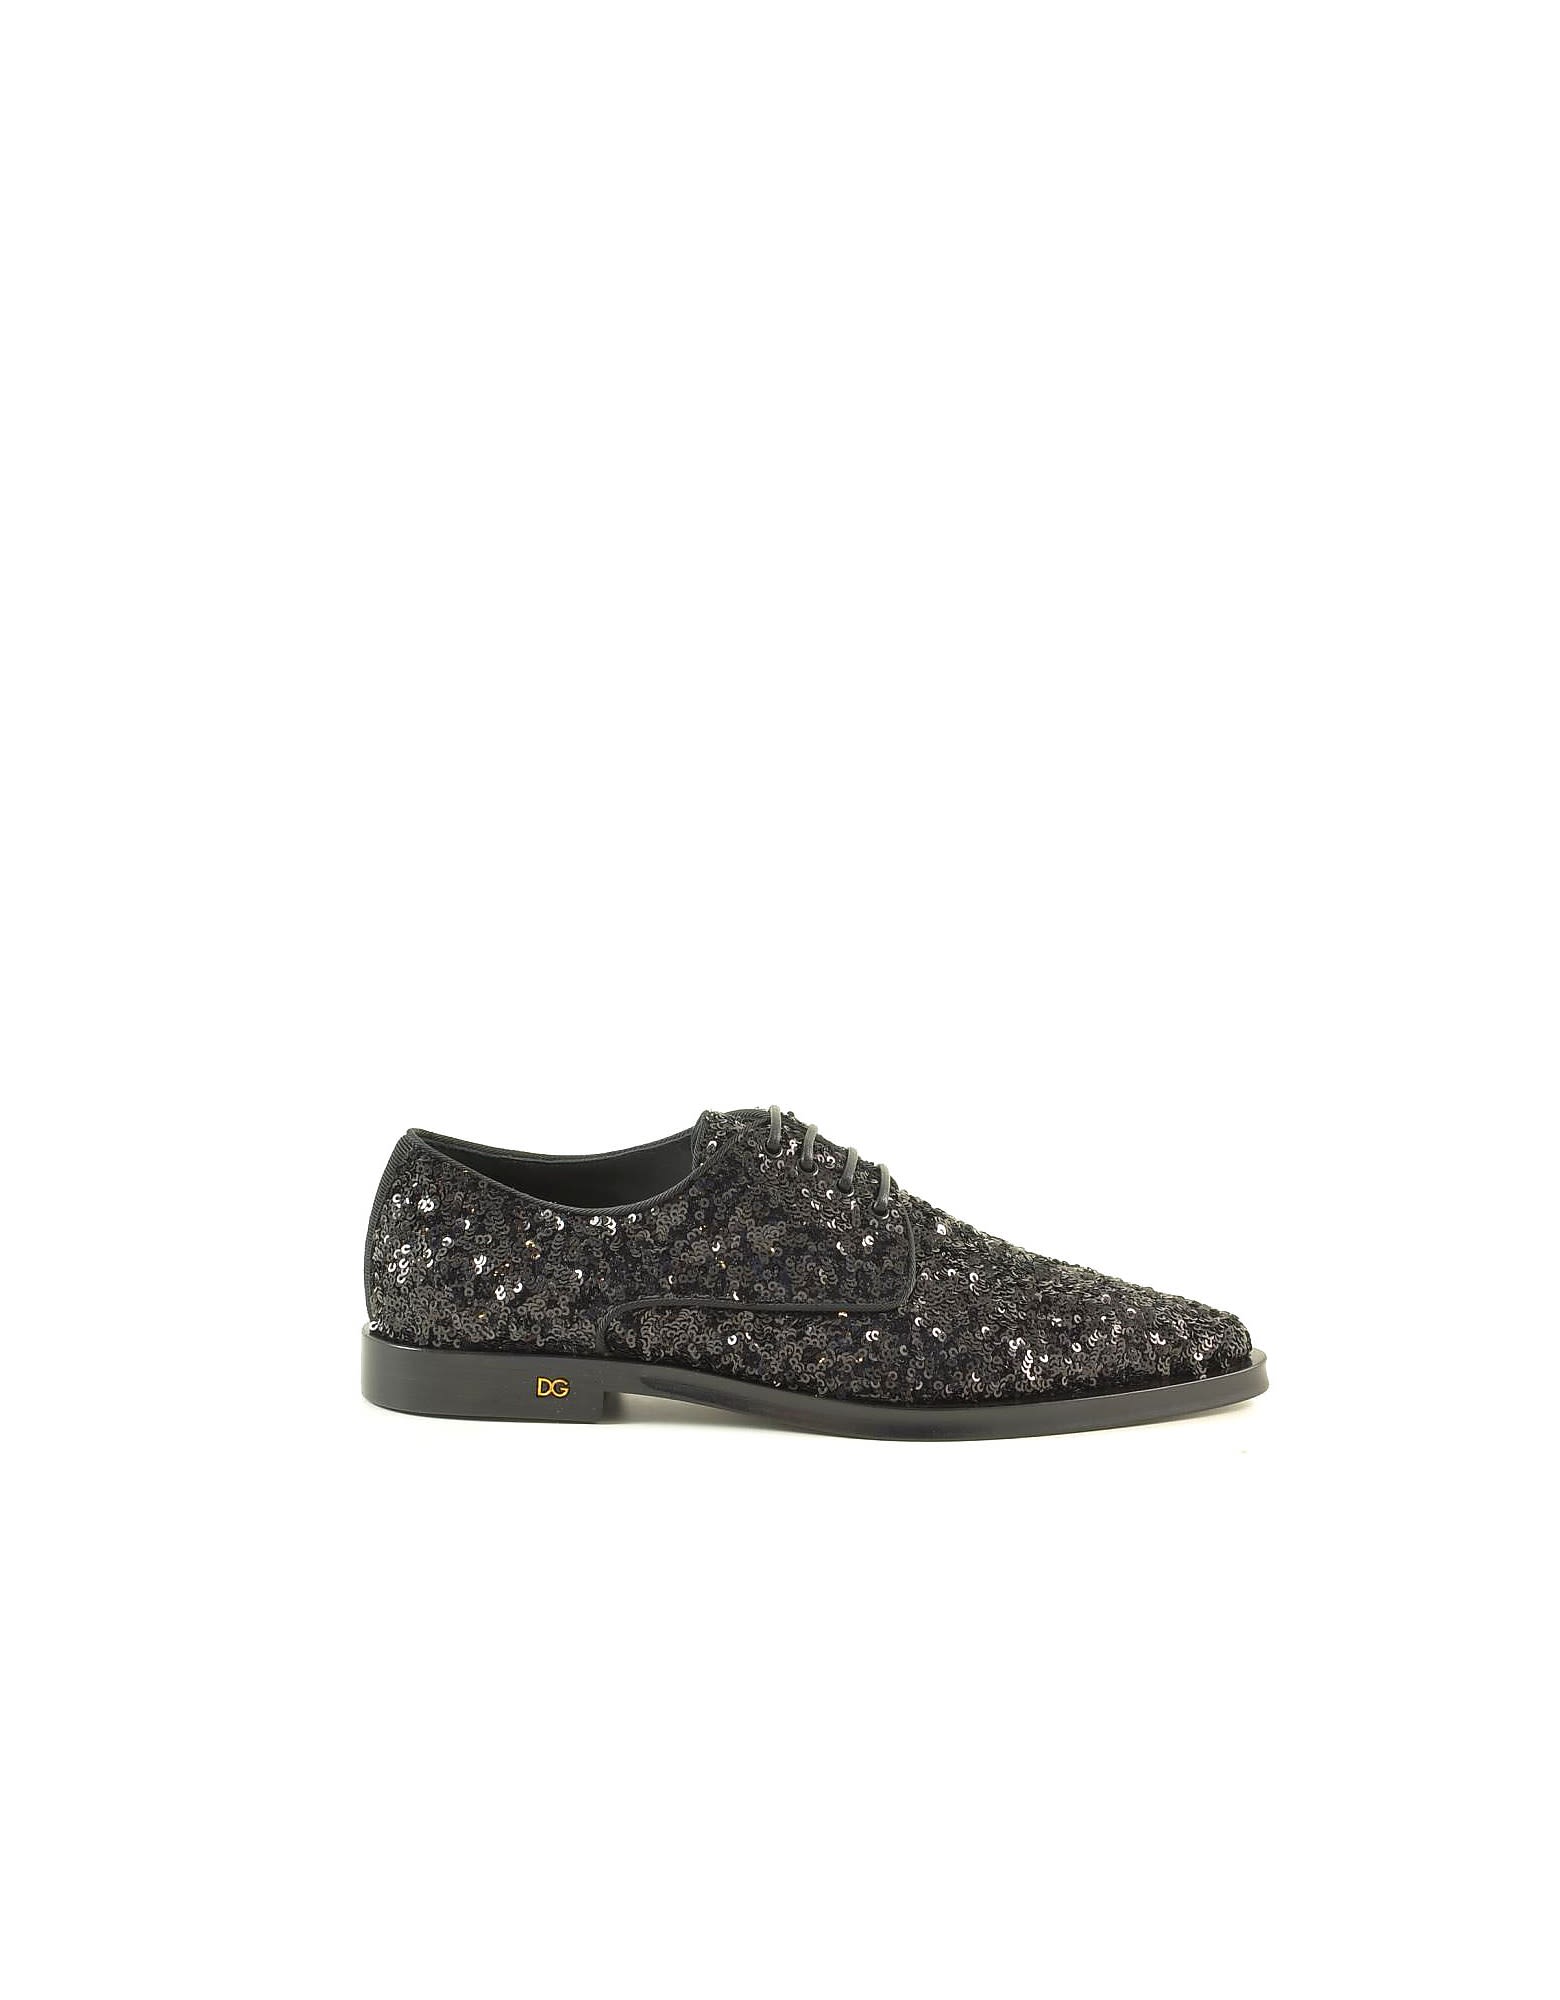 Buy Dolce & Gabbana Black Sequins Oxford Shoes online, shop Dolce & Gabbana shoes with free shipping